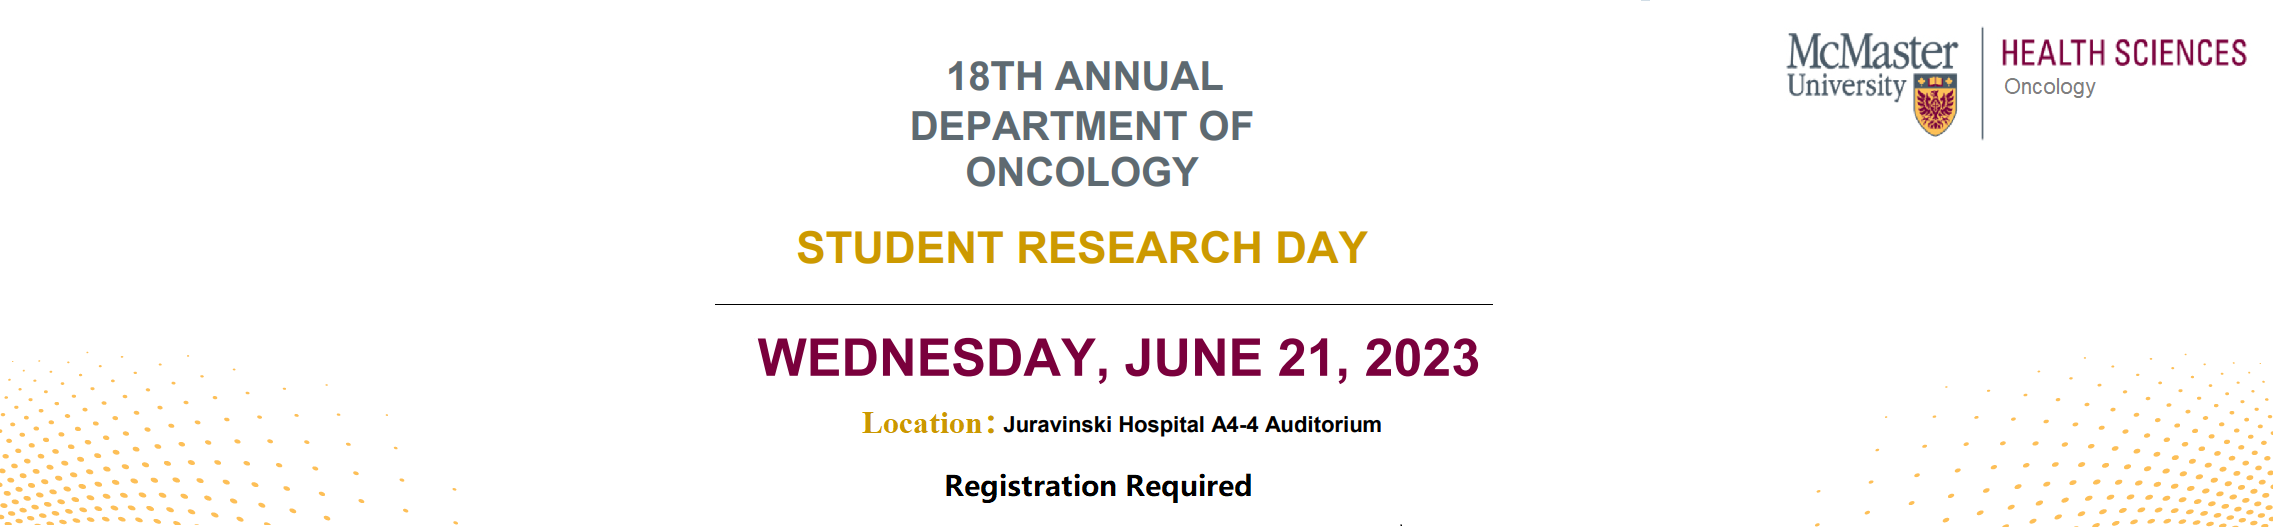 Department of Oncology Student Research Day 2023